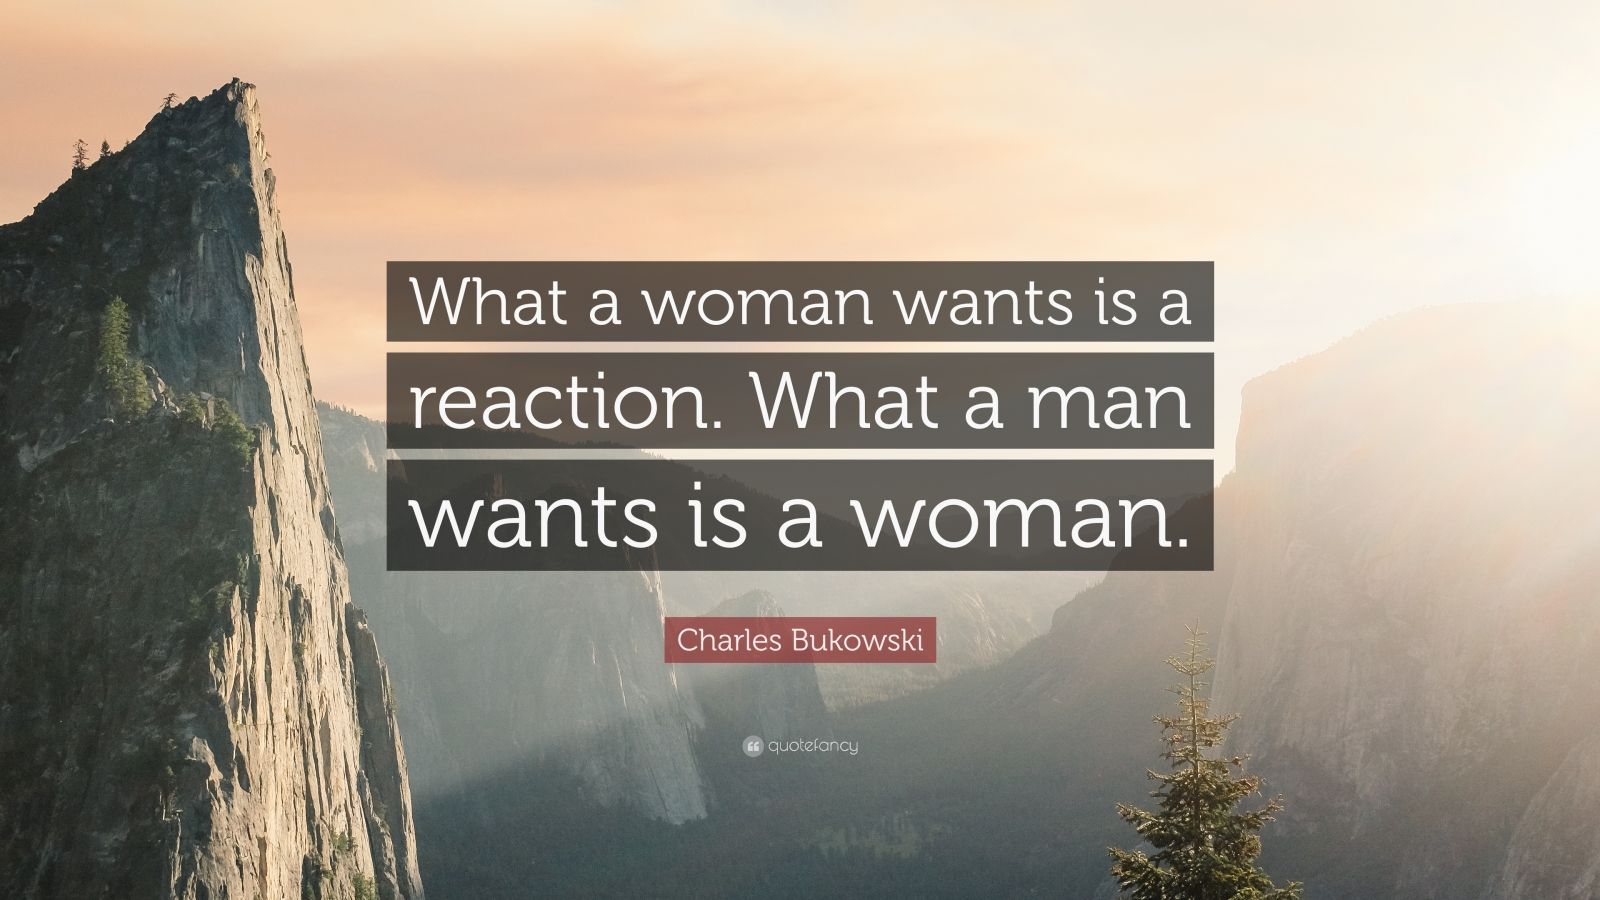 Charles Bukowski Quote: “What a woman wants is a reaction. What a man ...